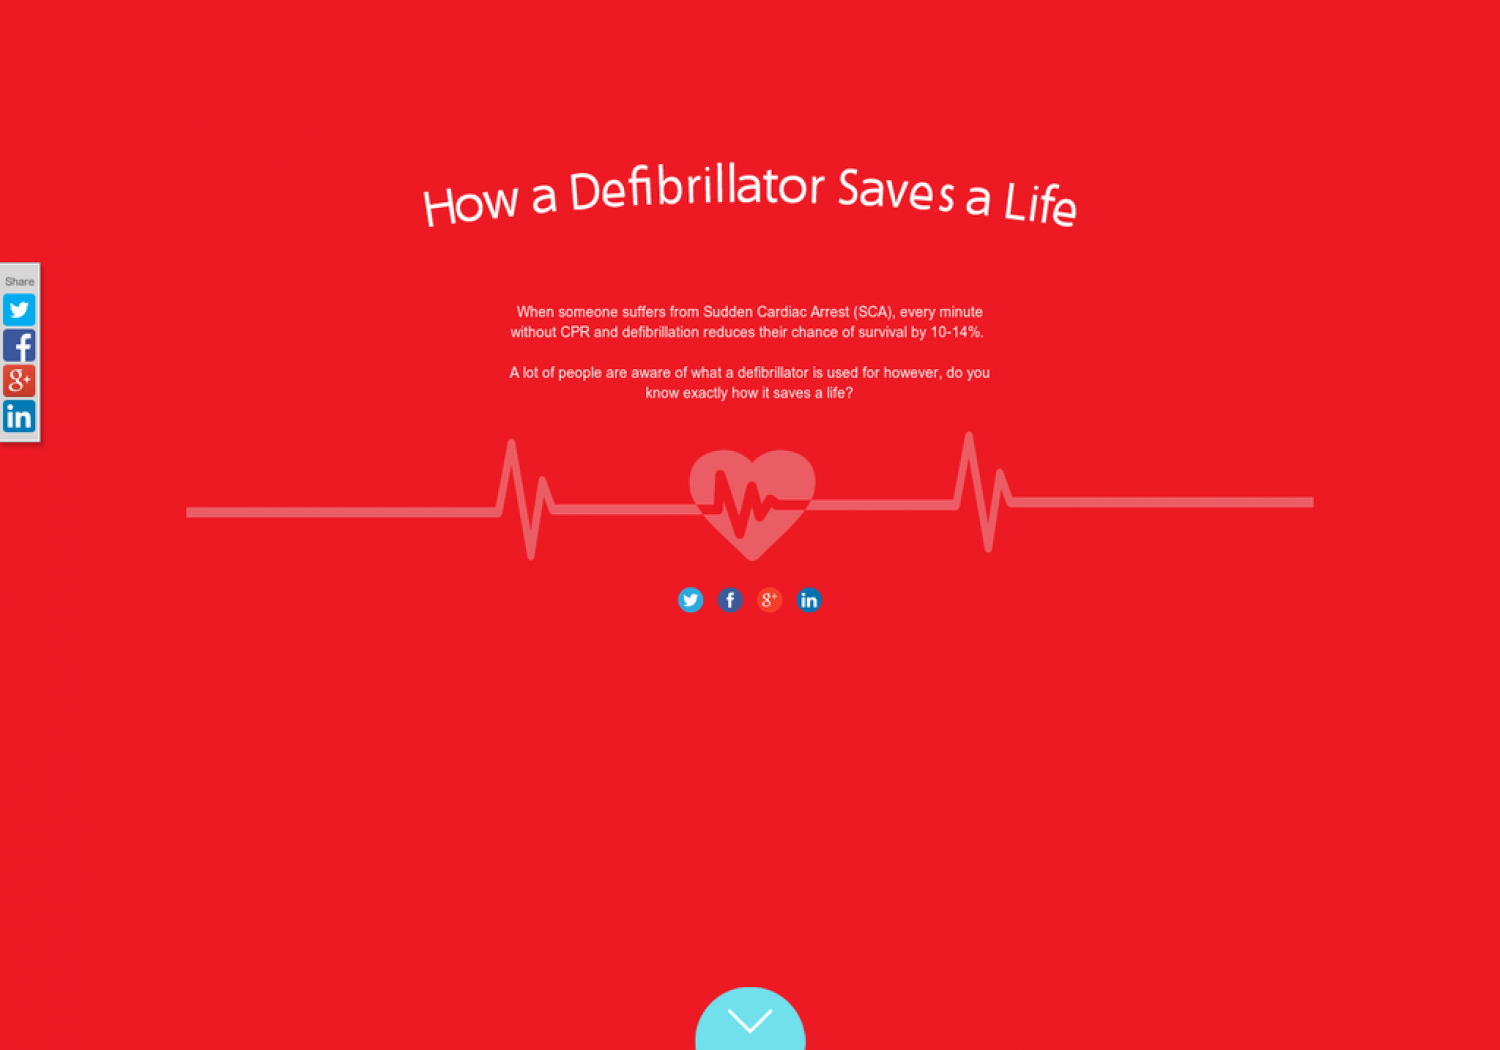 How a defibrillator saves a life Infographic